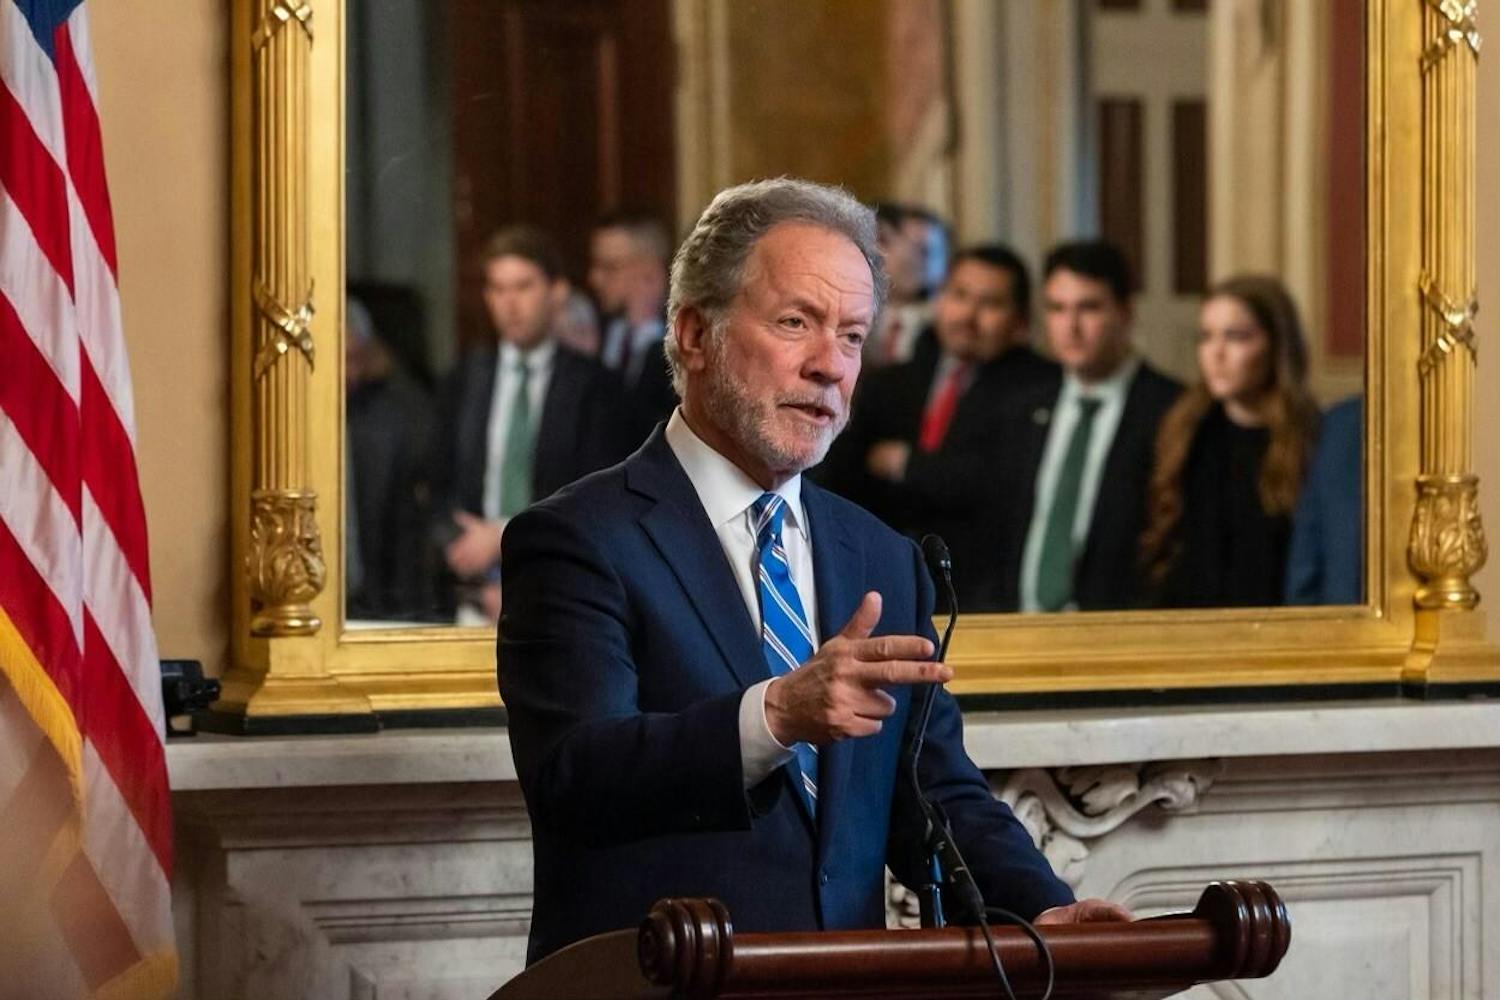 Former South Carolina Gov. David Beasley at the South Carolina Statehouse in Columbia, South Carolina. Beasley joined the 鶹С򽴫ý Joseph F. Rice School of Law on March 1 as a faculty professor in the Department of Legal Studies.